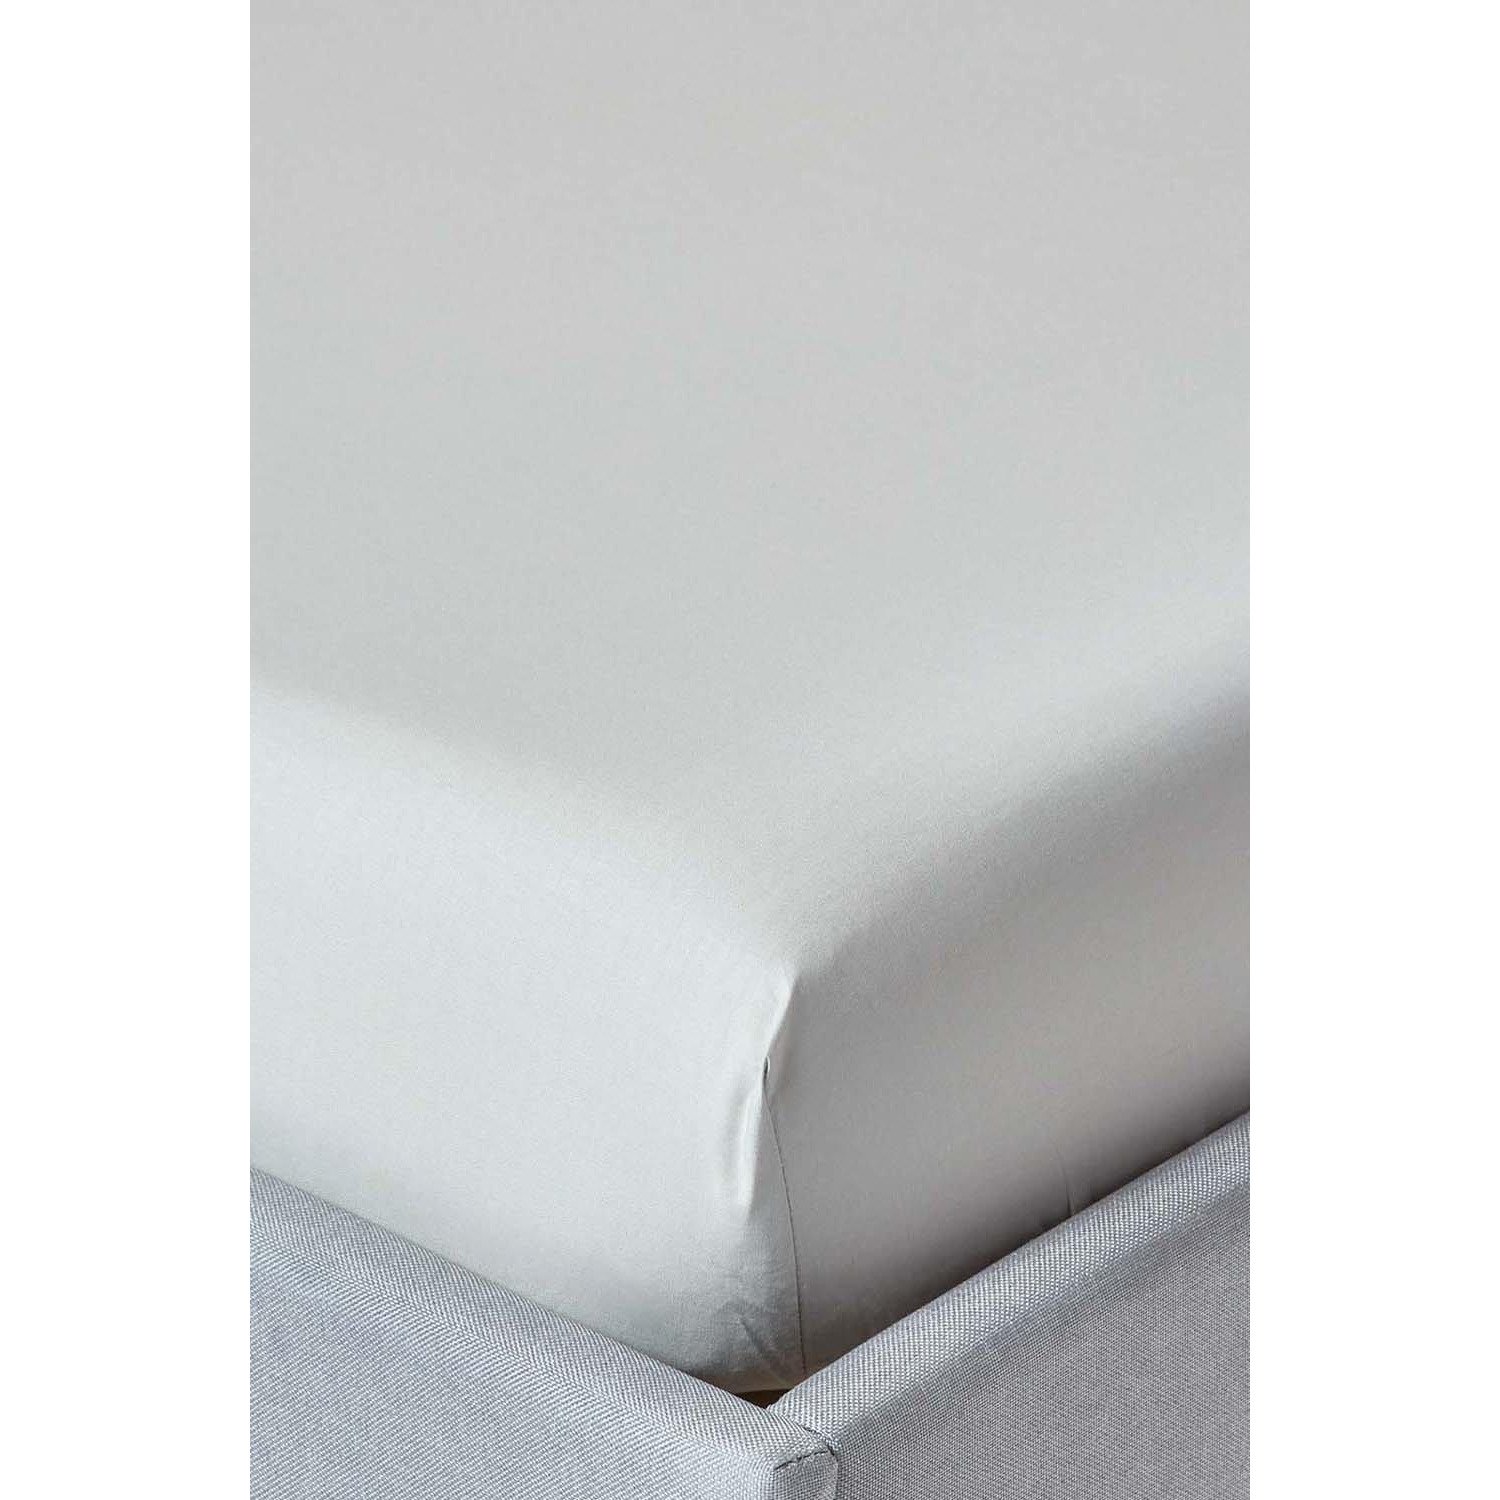 Egyptian Cotton Deep Fitted Sheet 18 inch 200 Thread Count - image 1